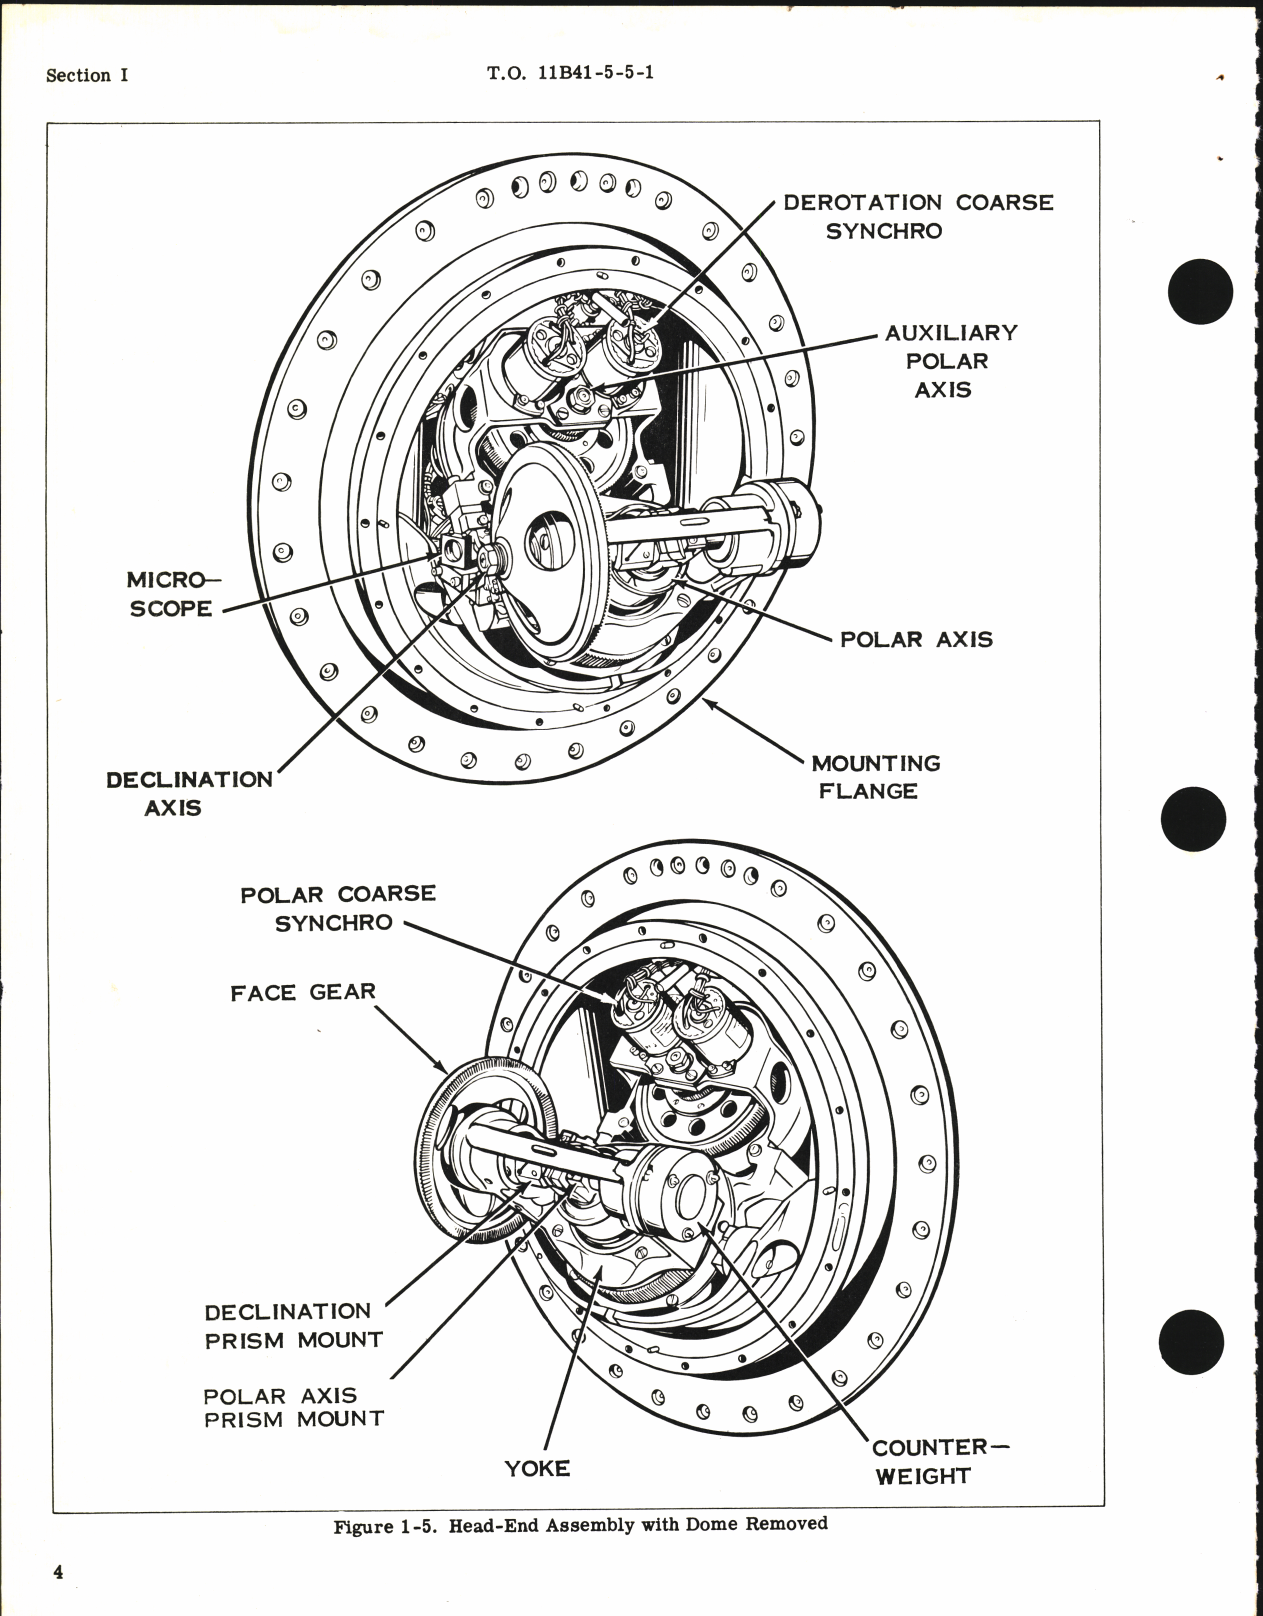 Sample page 8 from AirCorps Library document: Operation and Service Instructions for Type Y-4 Horizontal Periscopic Bombsight